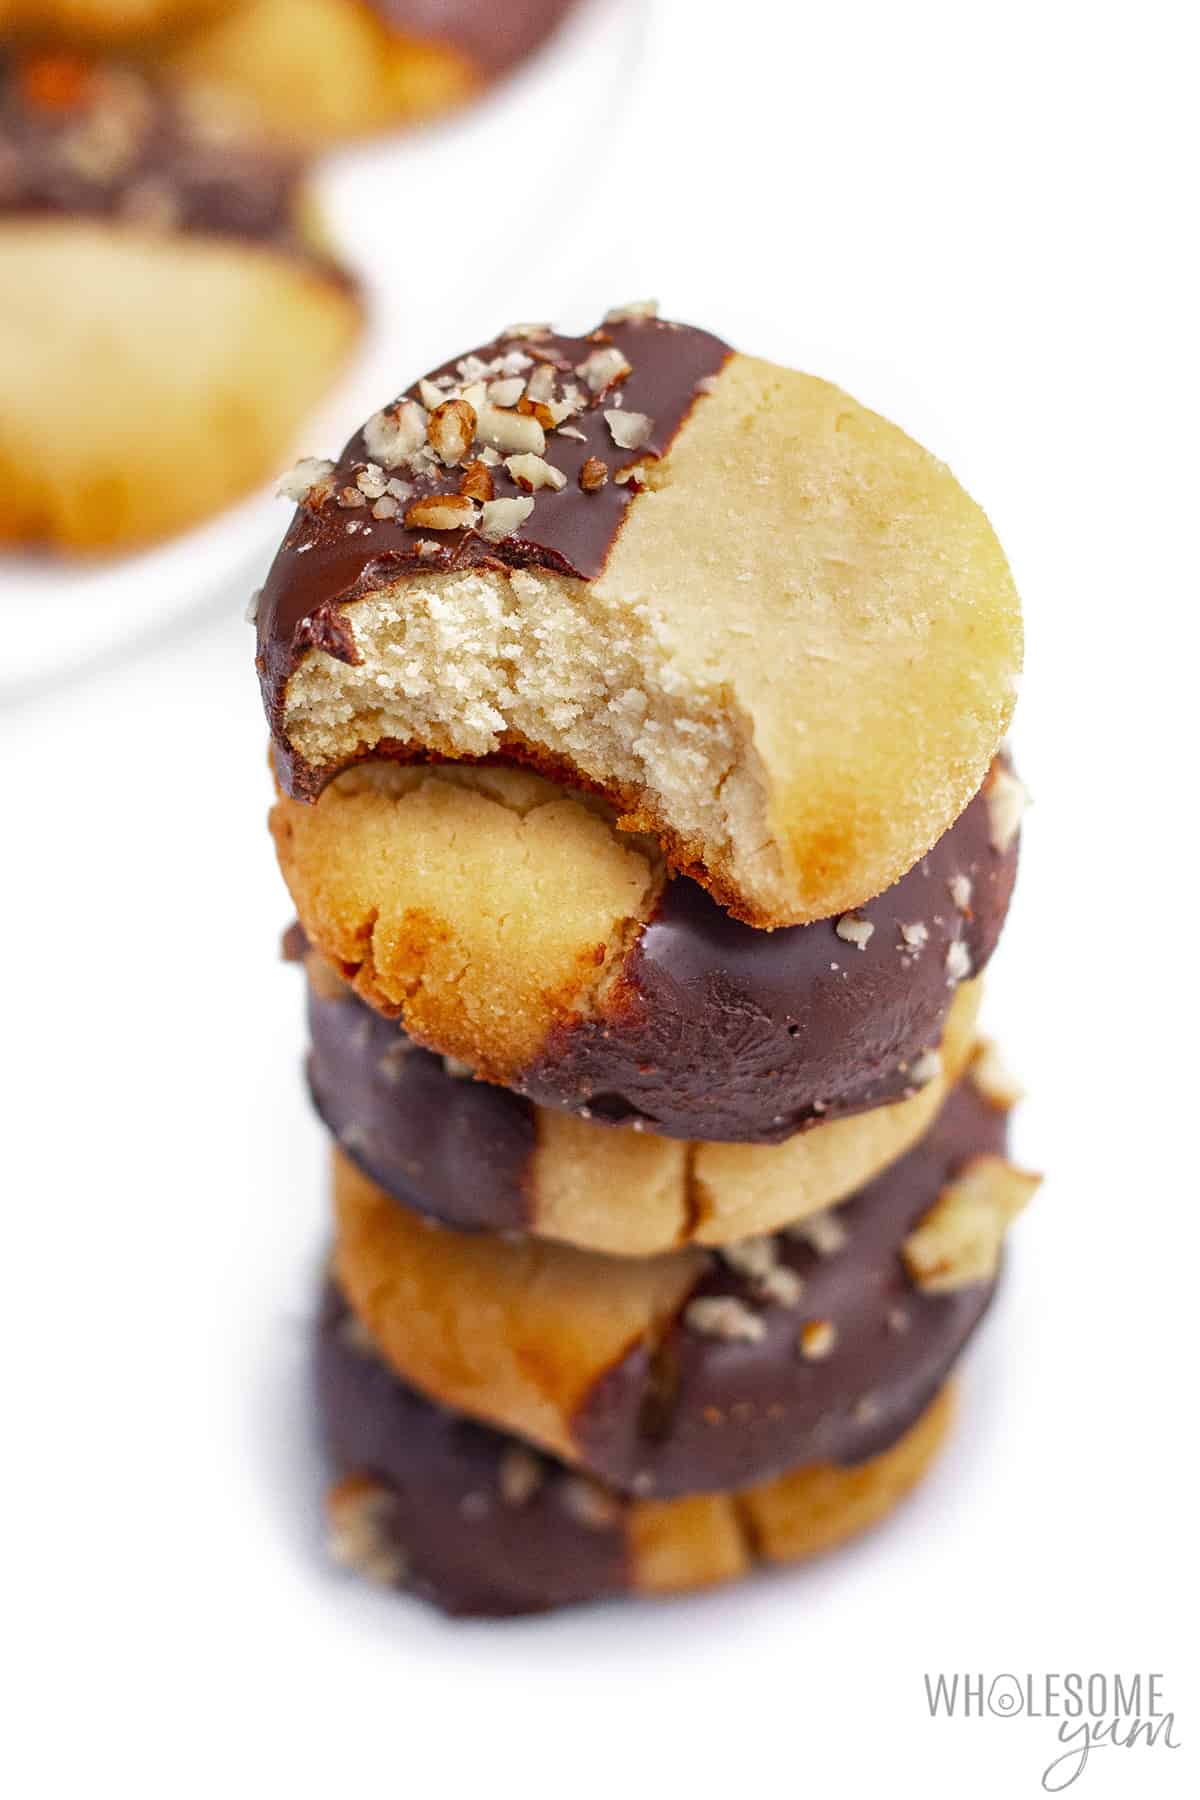 Stack of cookies with one bite taken out of top cookie.